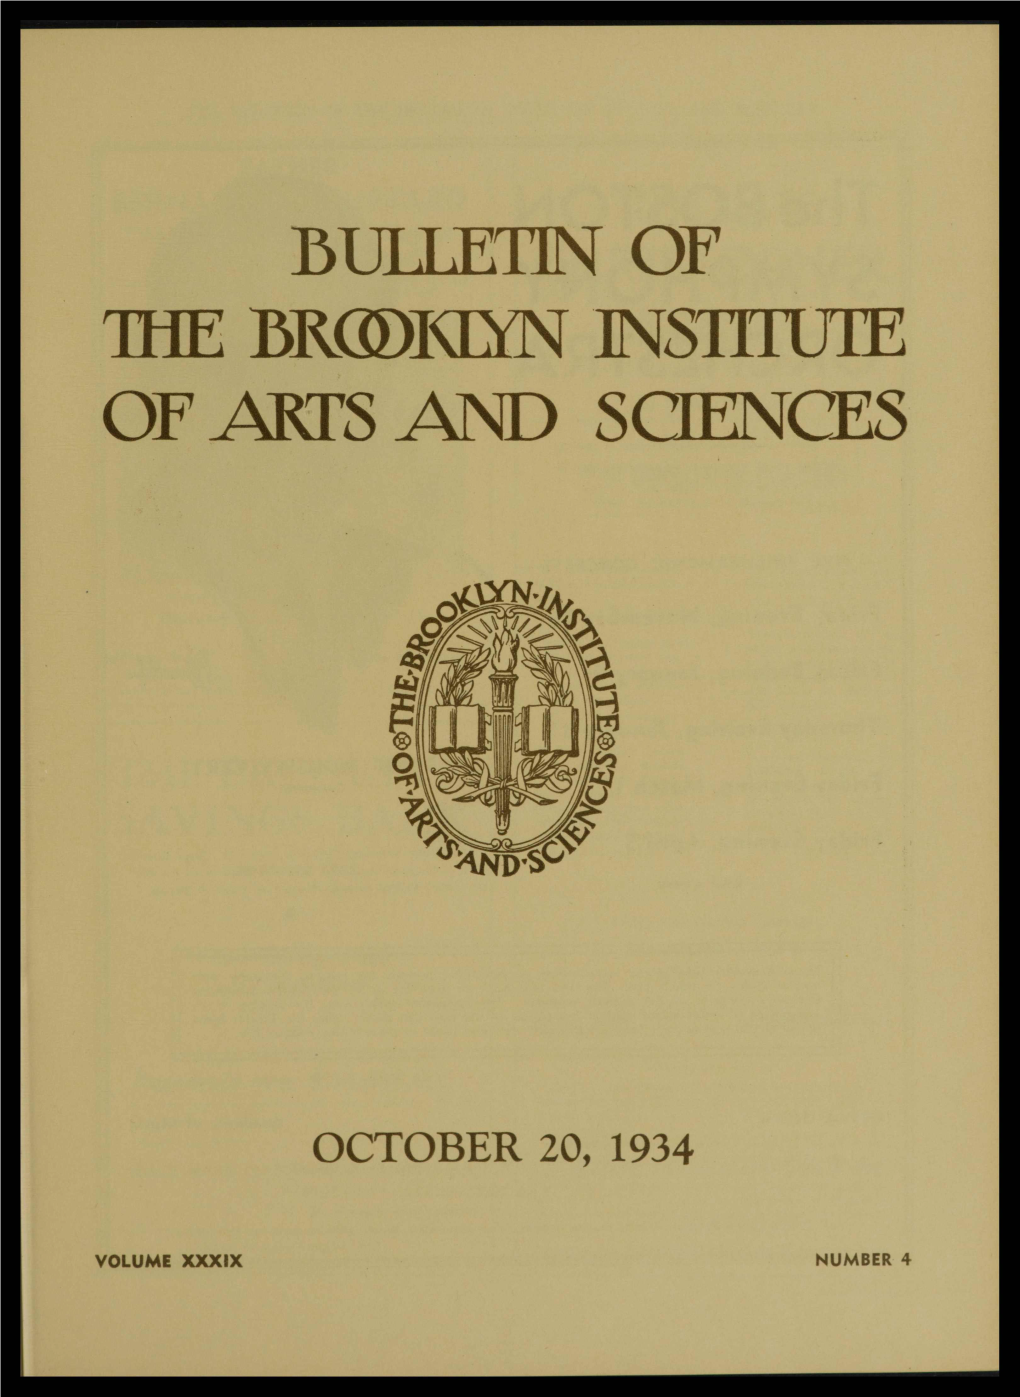 BULLETIN of the BRGDRIYN Inshture of ARTS AND